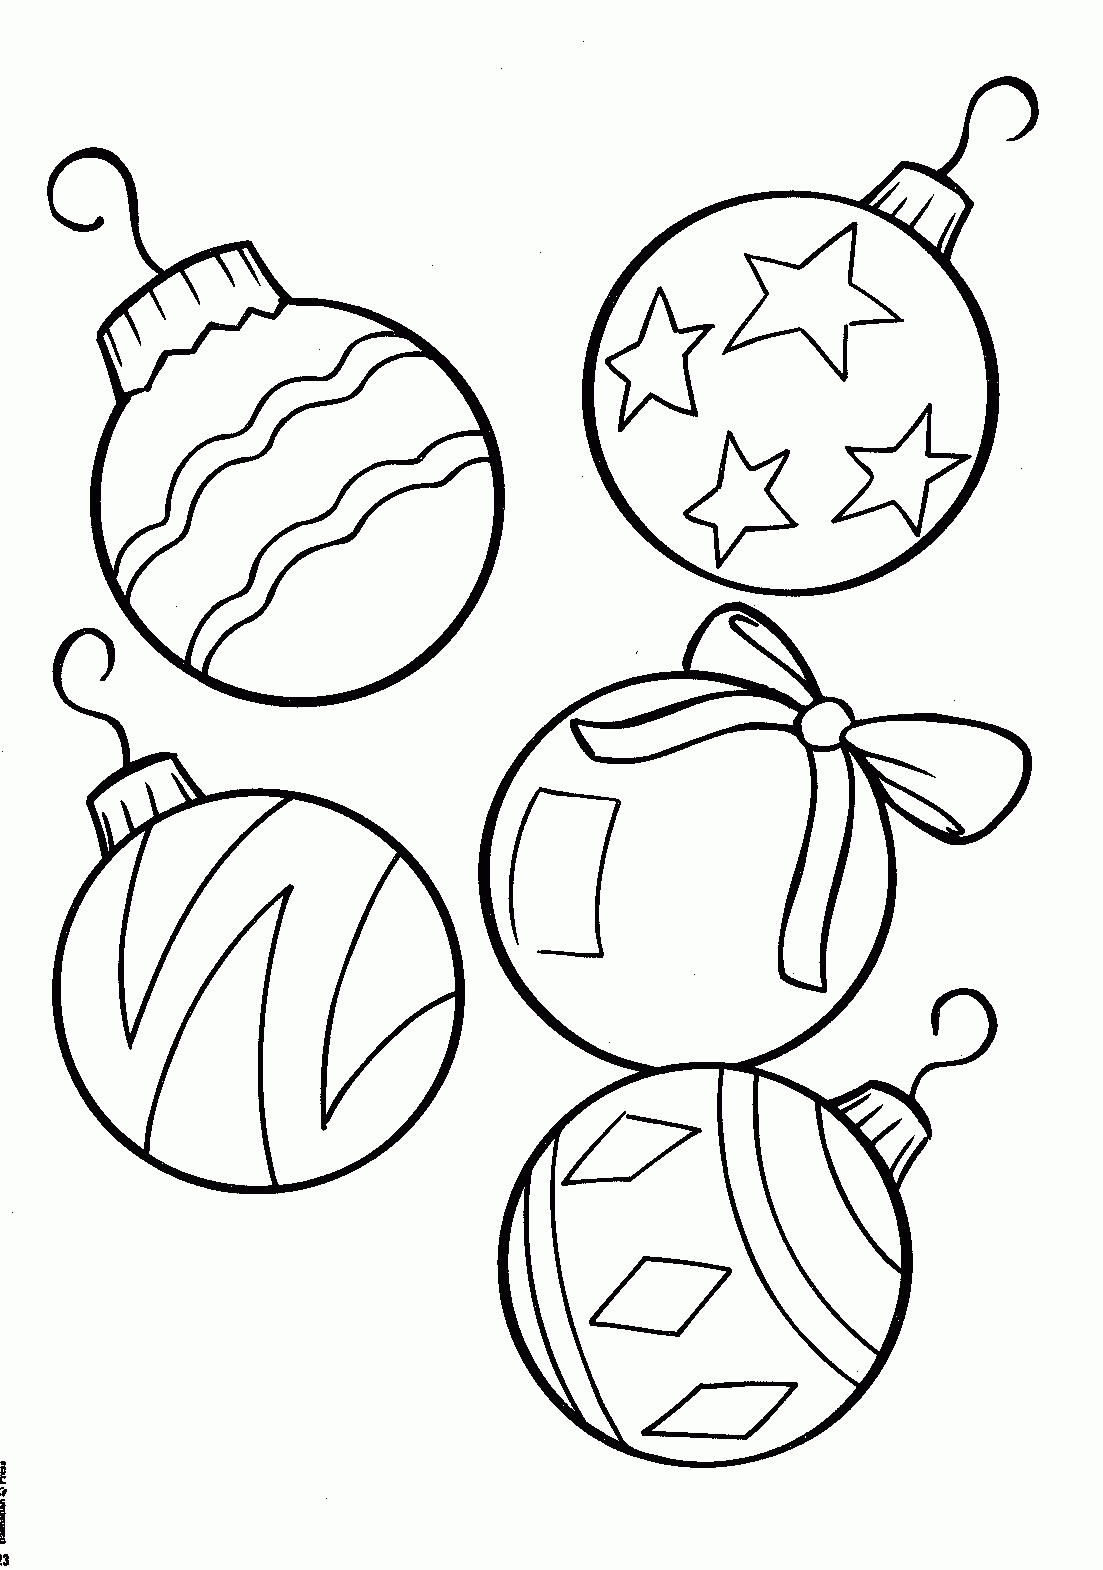 Free Printable Christmas Tree Ornaments Coloring Pages - Free Printable